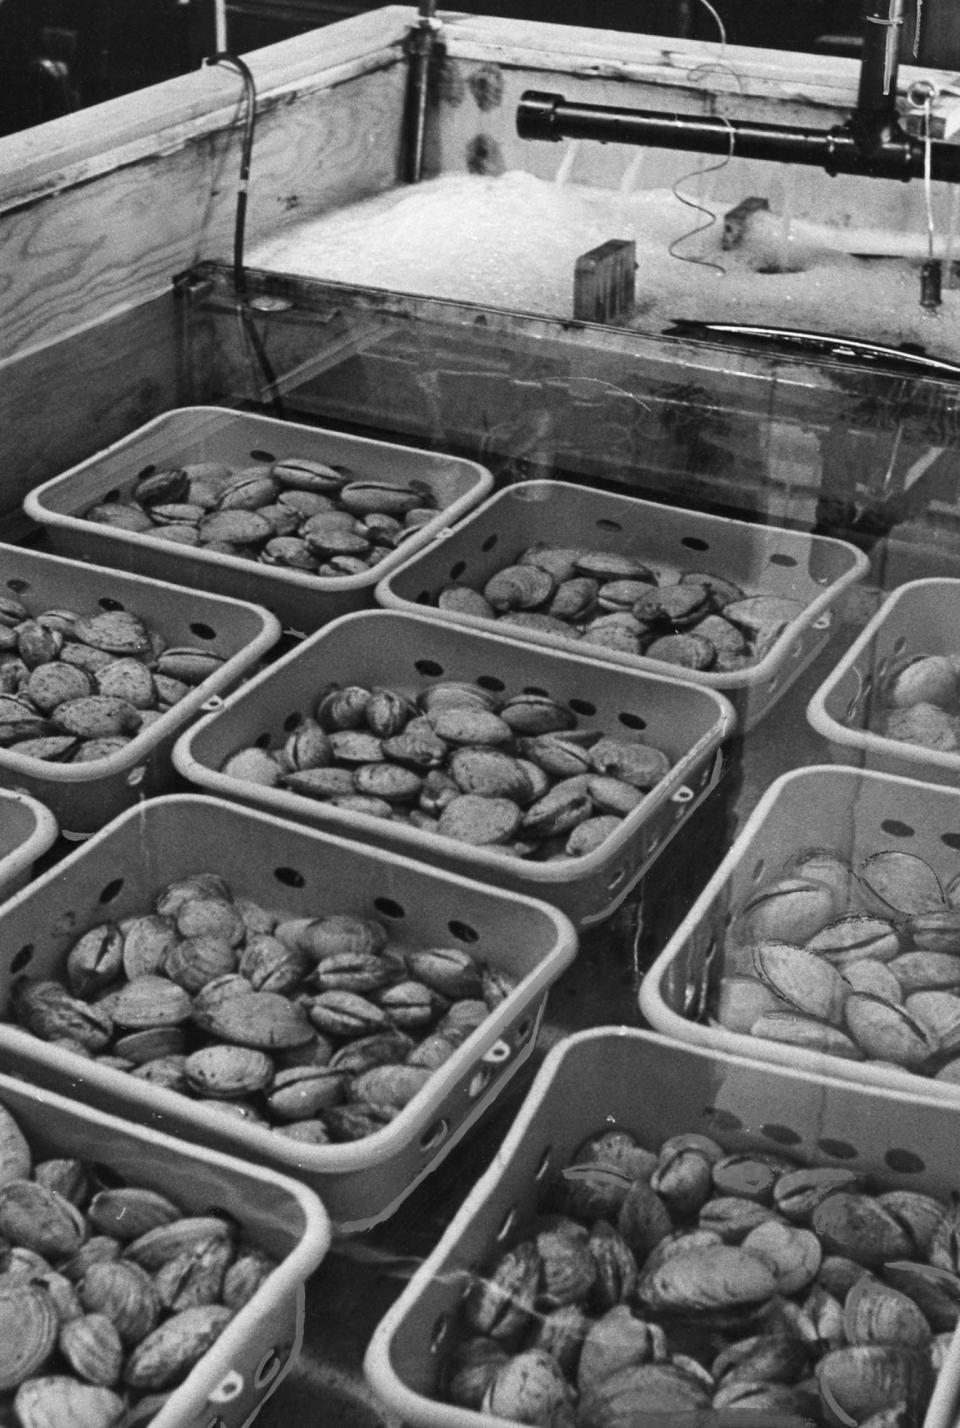 A November 1963 file photo shows baskets of quahogs taken from polluted areas of Bristol Harbor soaking in a tank at the old state armory in Bristol. Water from the same area is recirculated through the baskets after being cleaned and recleaned of harmful bacteria.